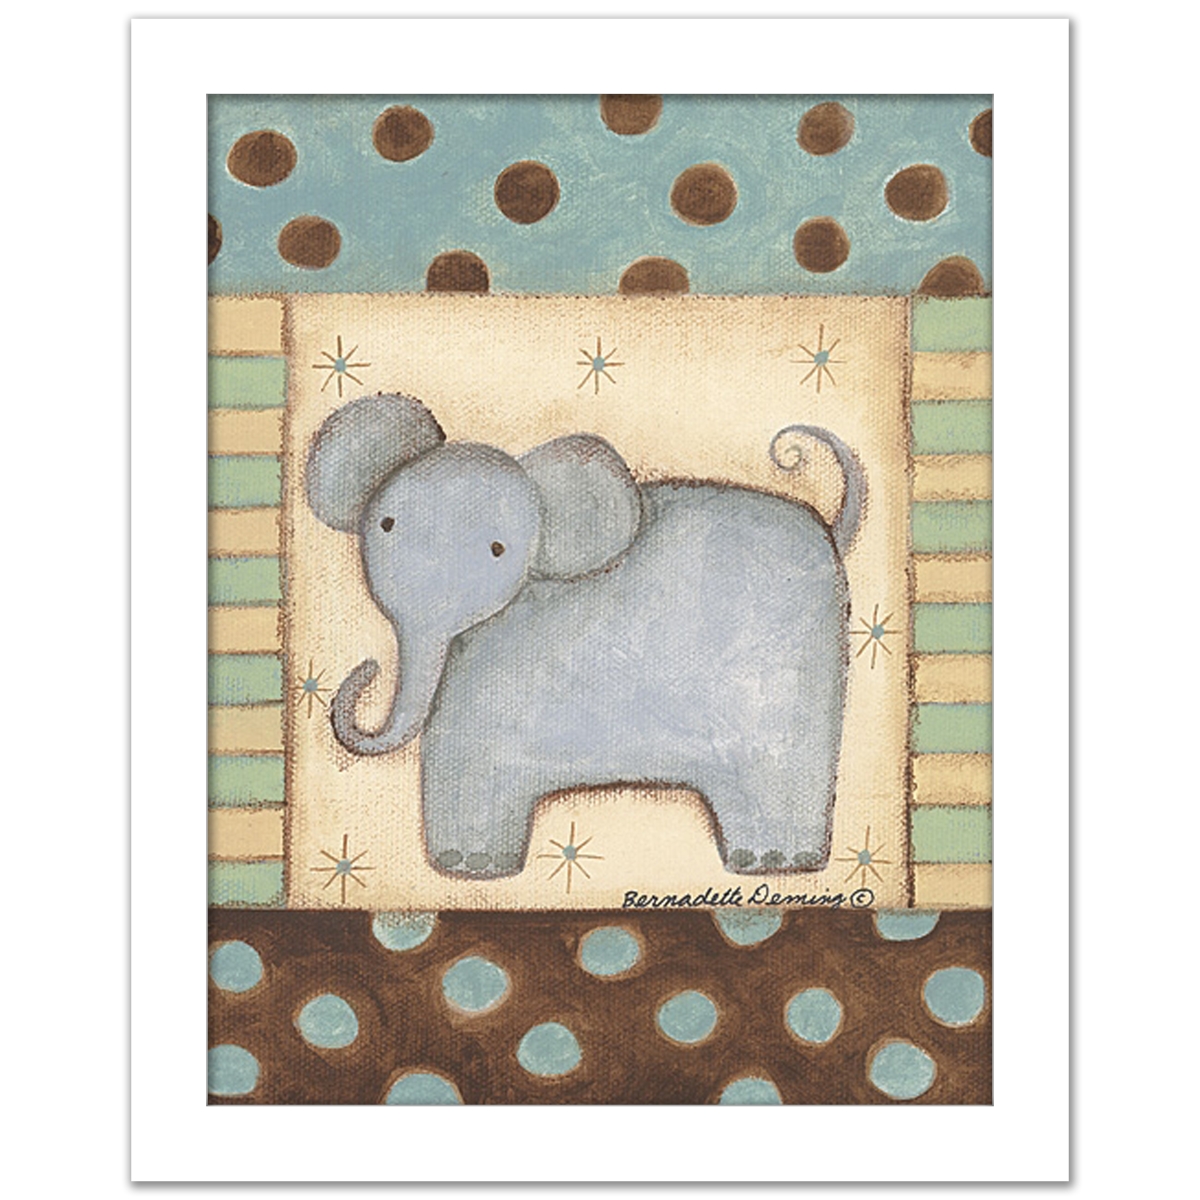 Picture of Timeless Frames 52000 Timeless Frames 52000 8x10 Baby Elephant Wall Decor